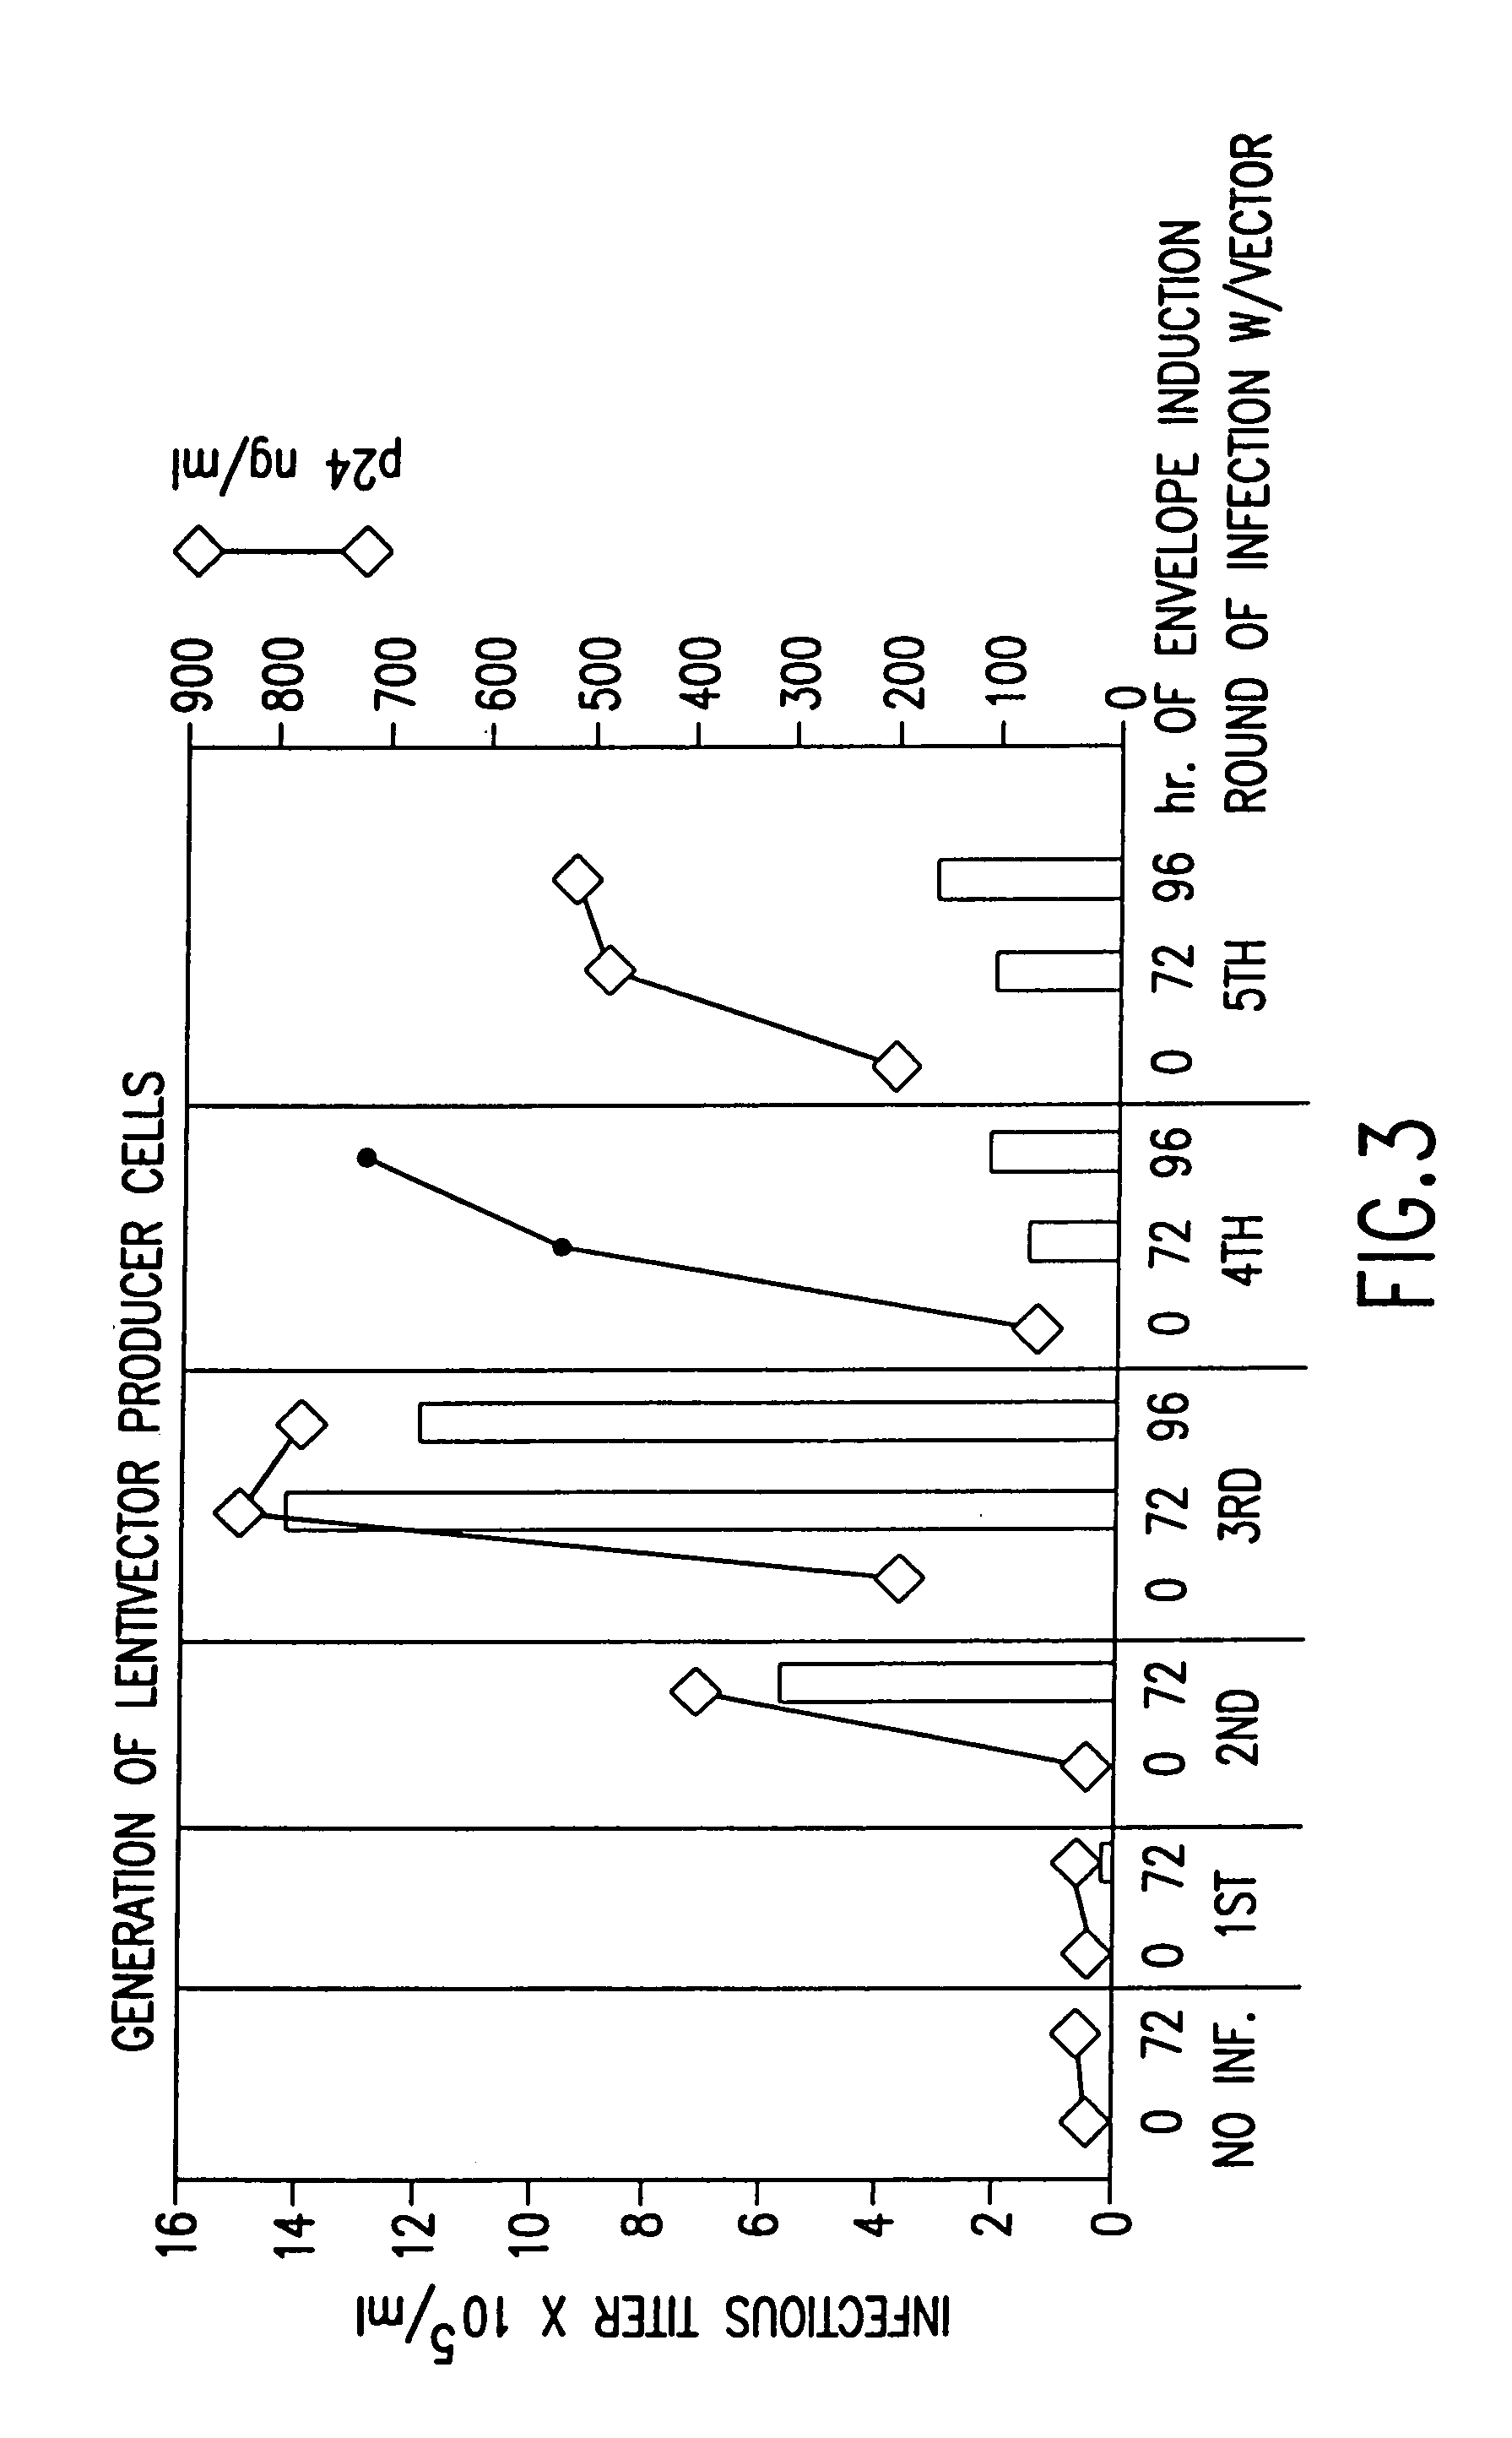 Method and means for producing high titer, safe, recombinant lentivirus vectors